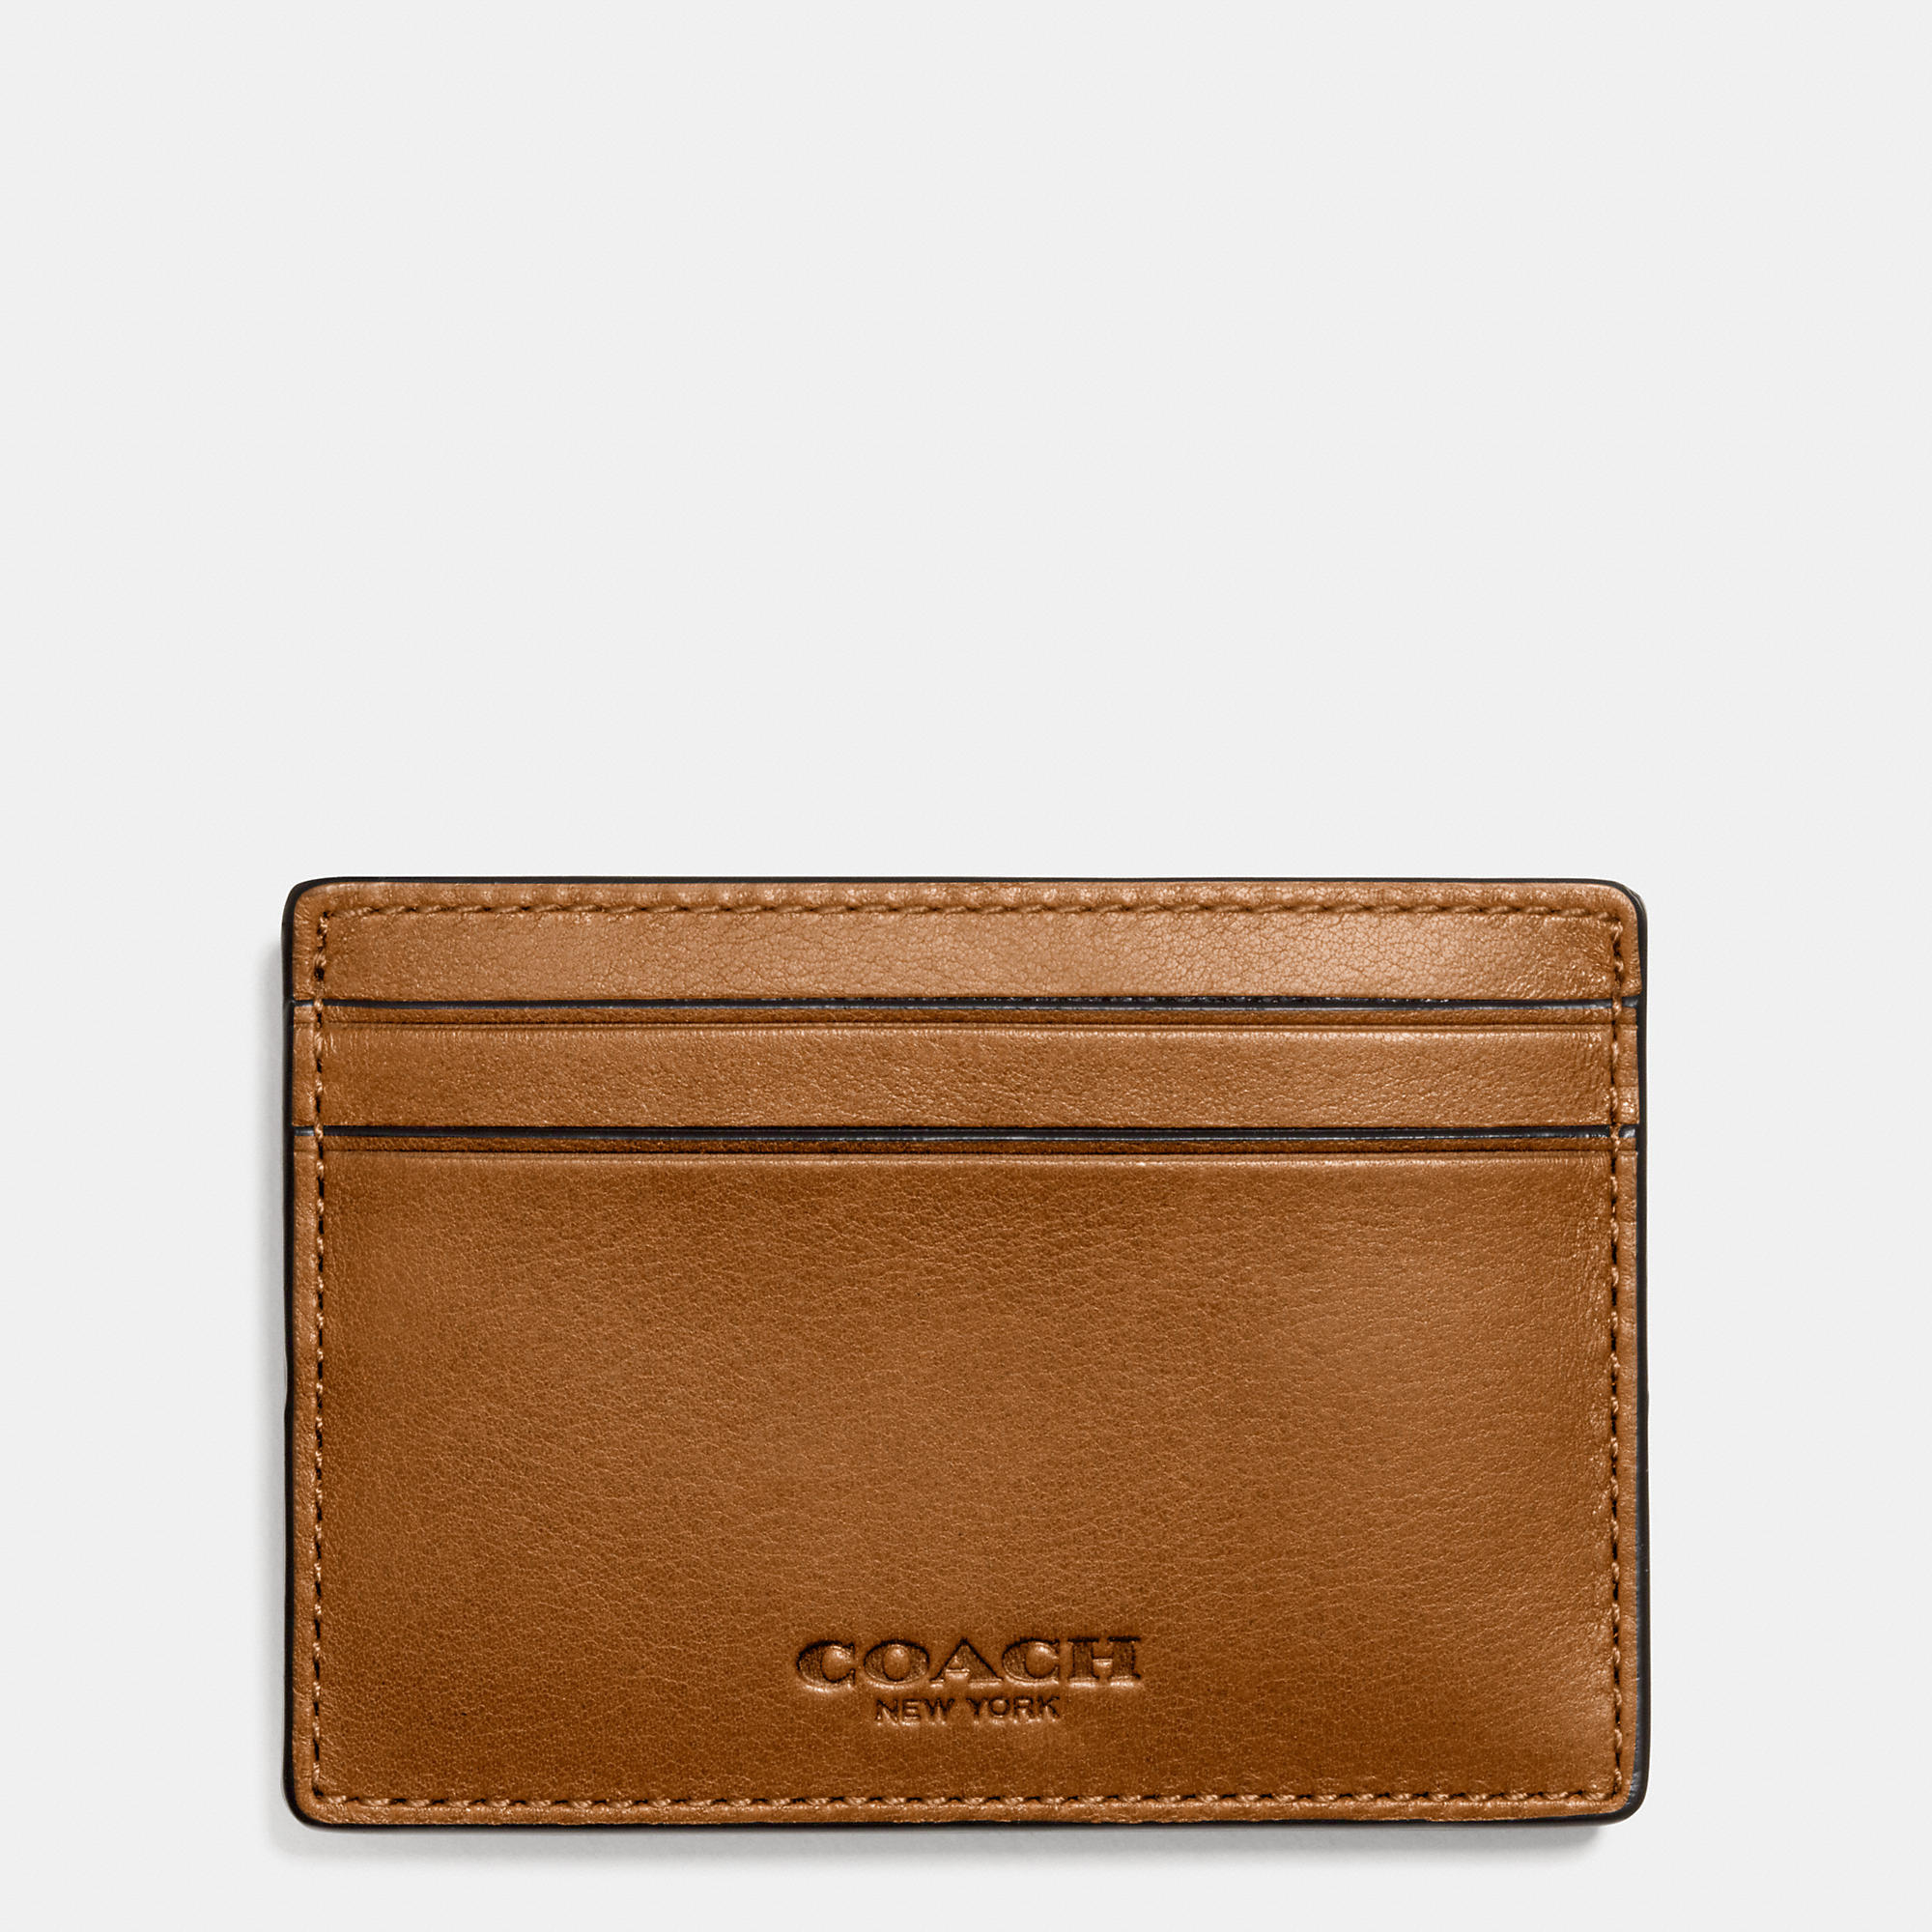 Lyst - Coach Money Clip Card Case in Sport Calf Leather in Brown for Men